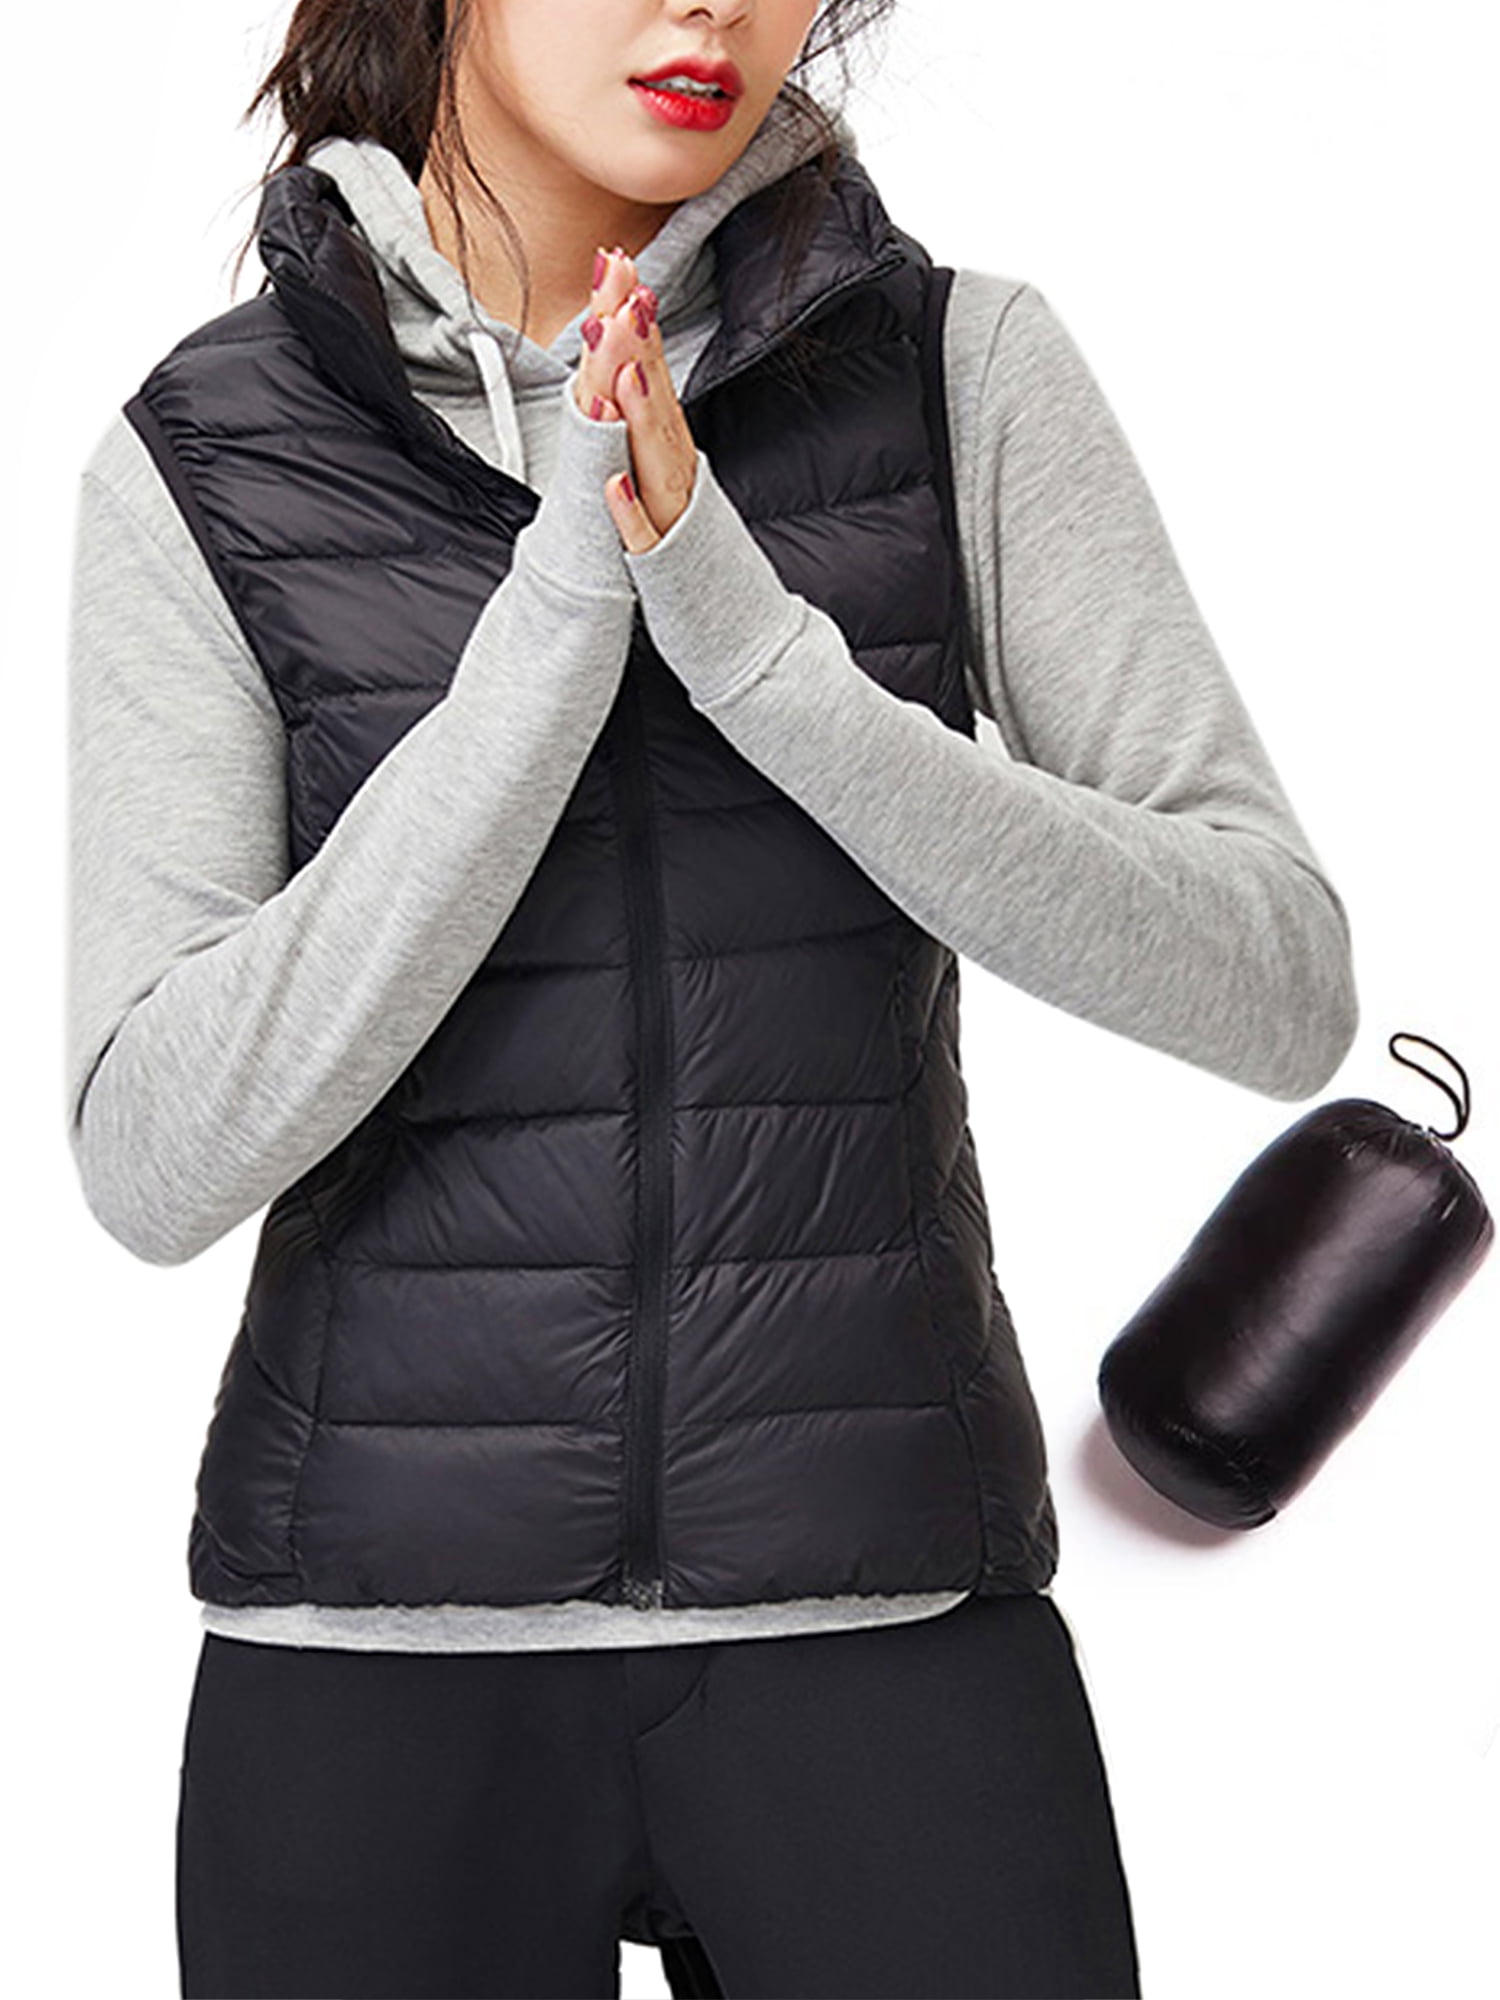 Lady Padded Quilted Waistcoat Vest Slim Vneck Short Warm Winter Casual Gilet